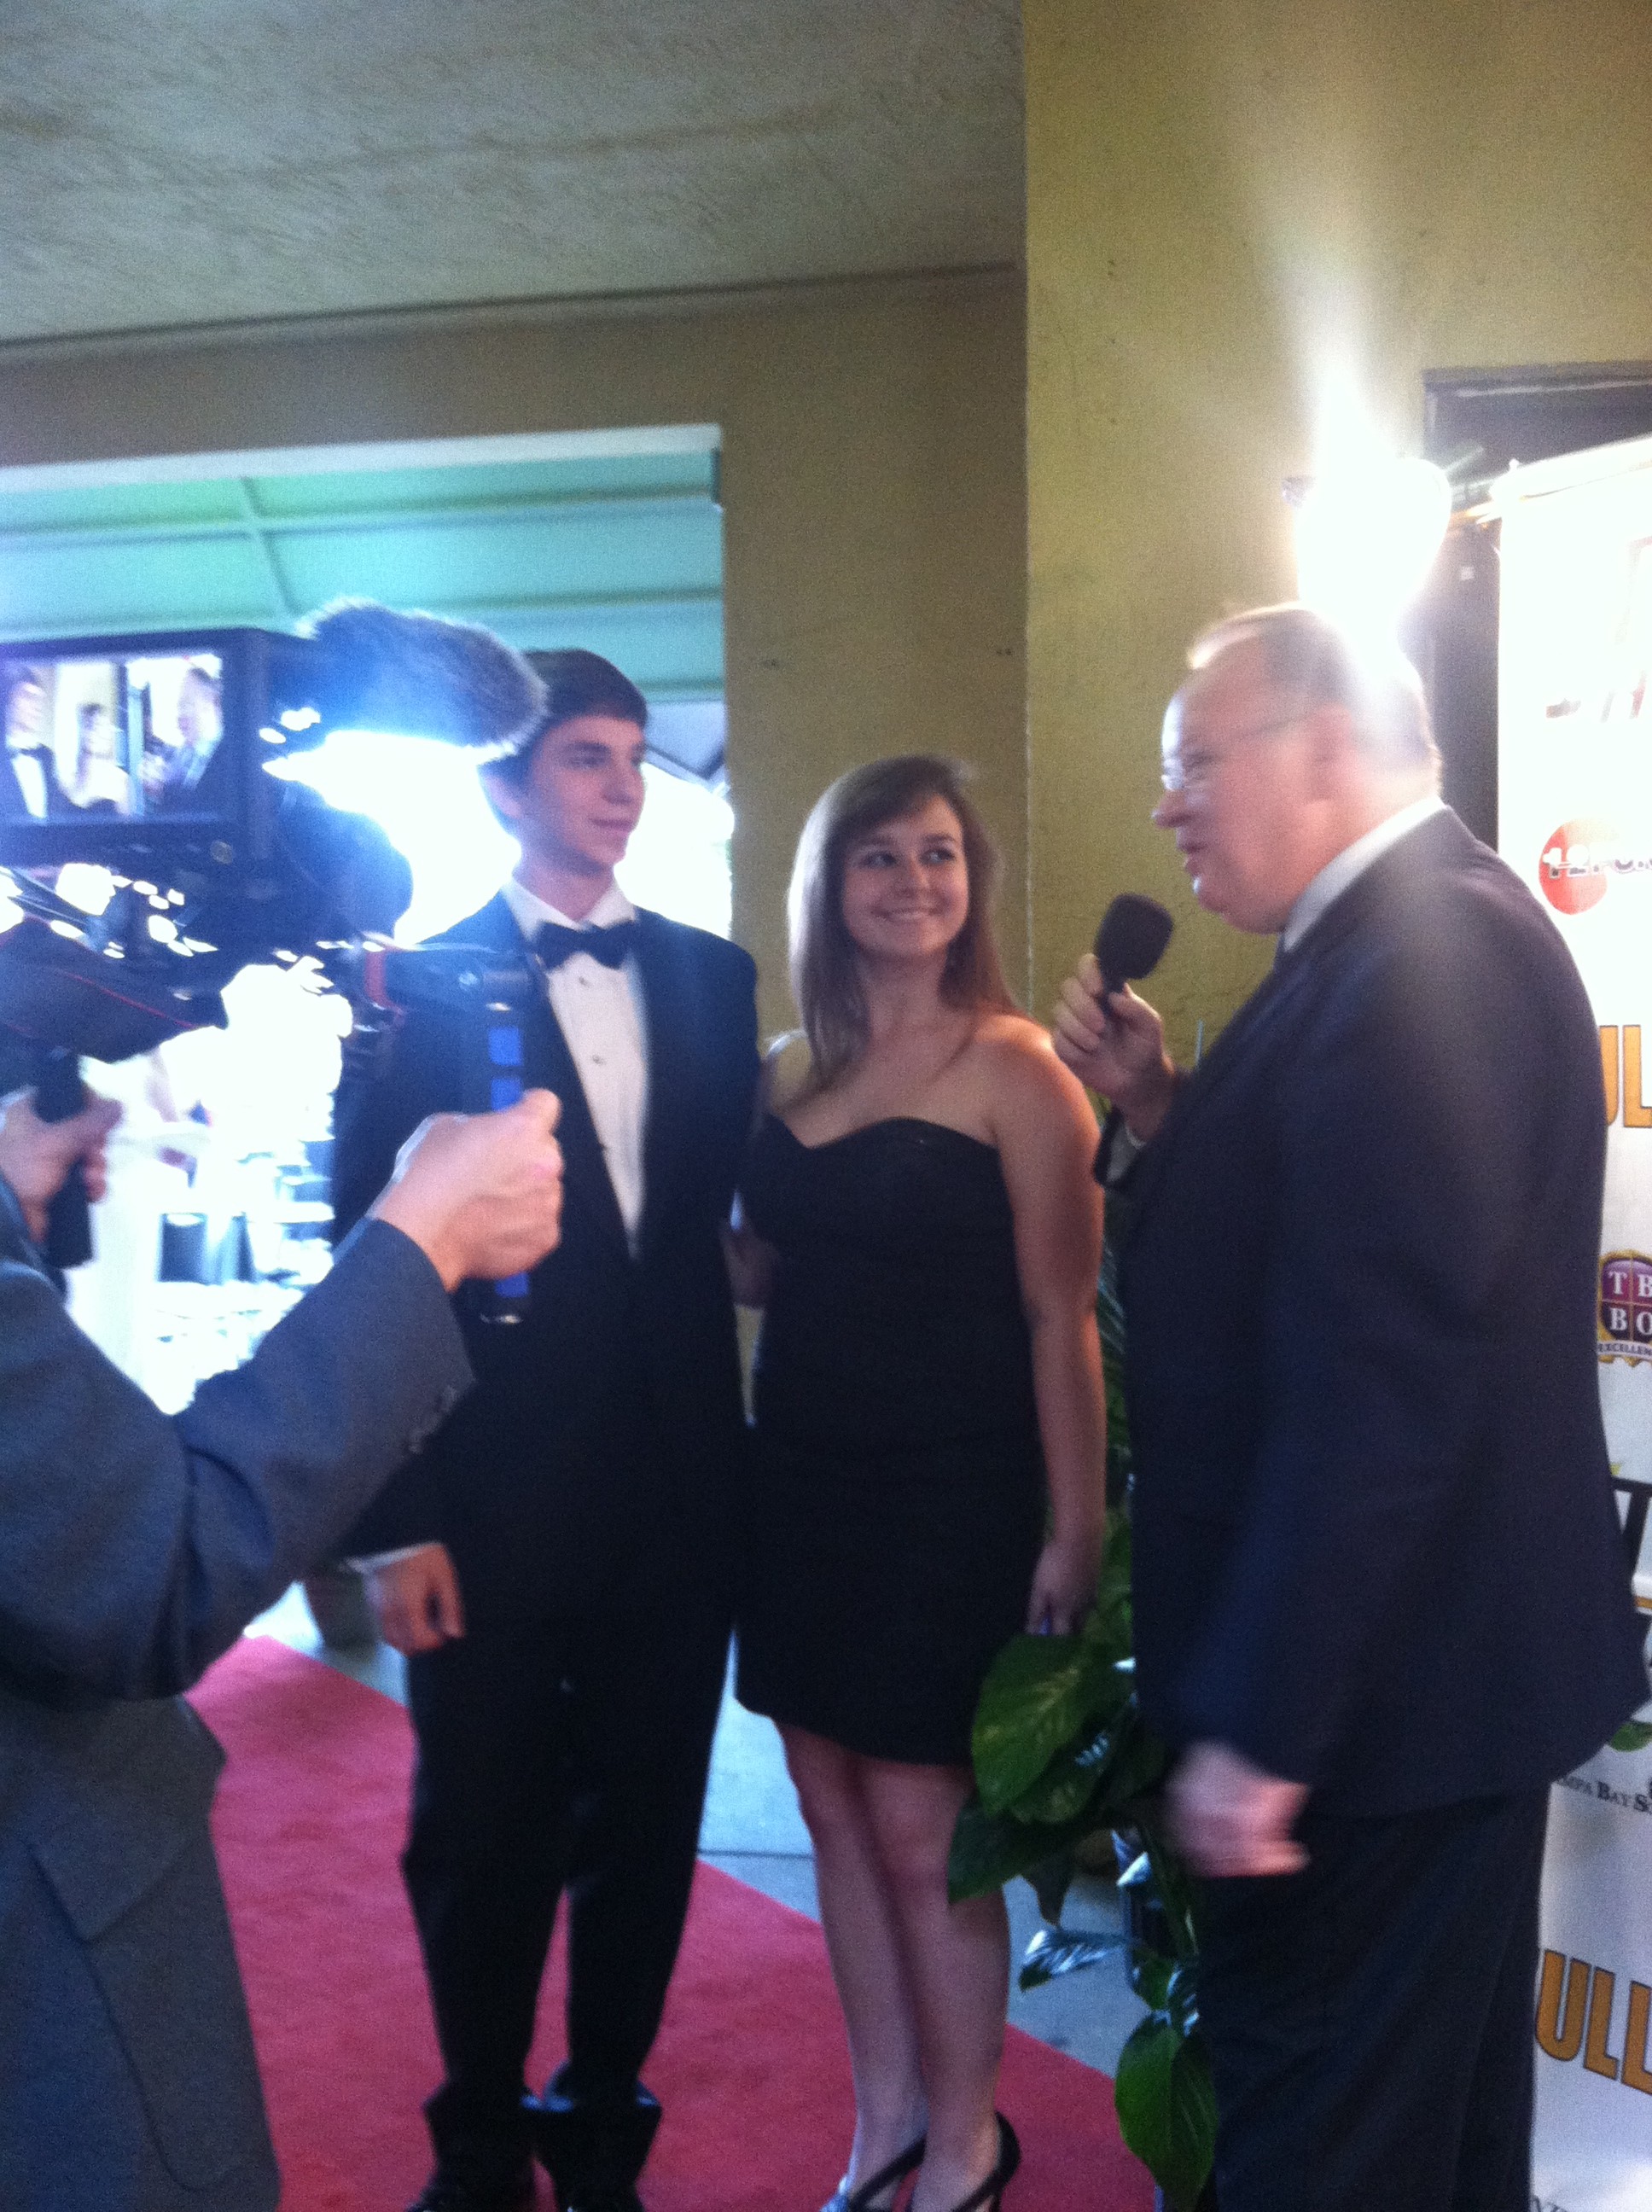 Catherine giving an interview on The Red Carpet.